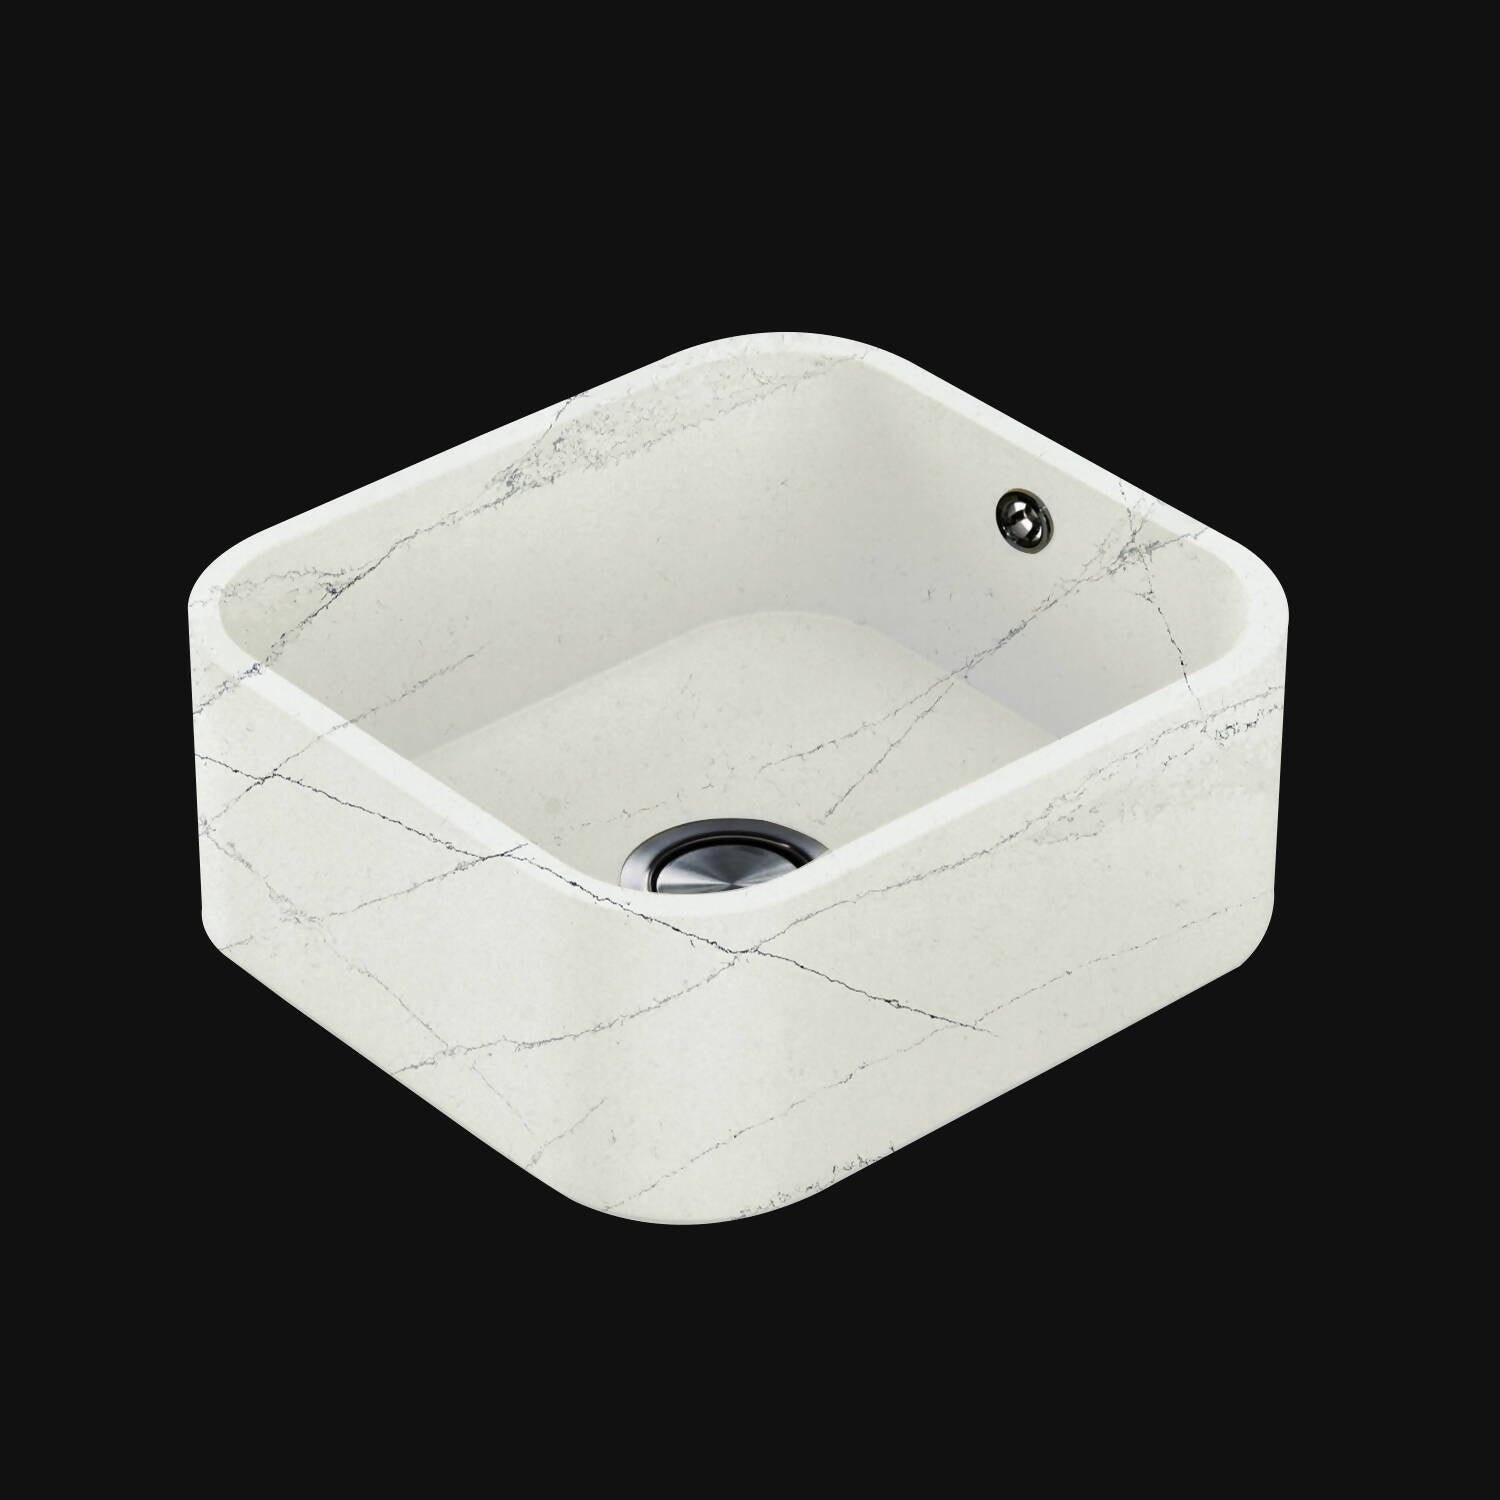 ETHEREAL NOCTIS INTEGRITY SINK,Stone Sink,Cosentino Sink,www.work-tops.com